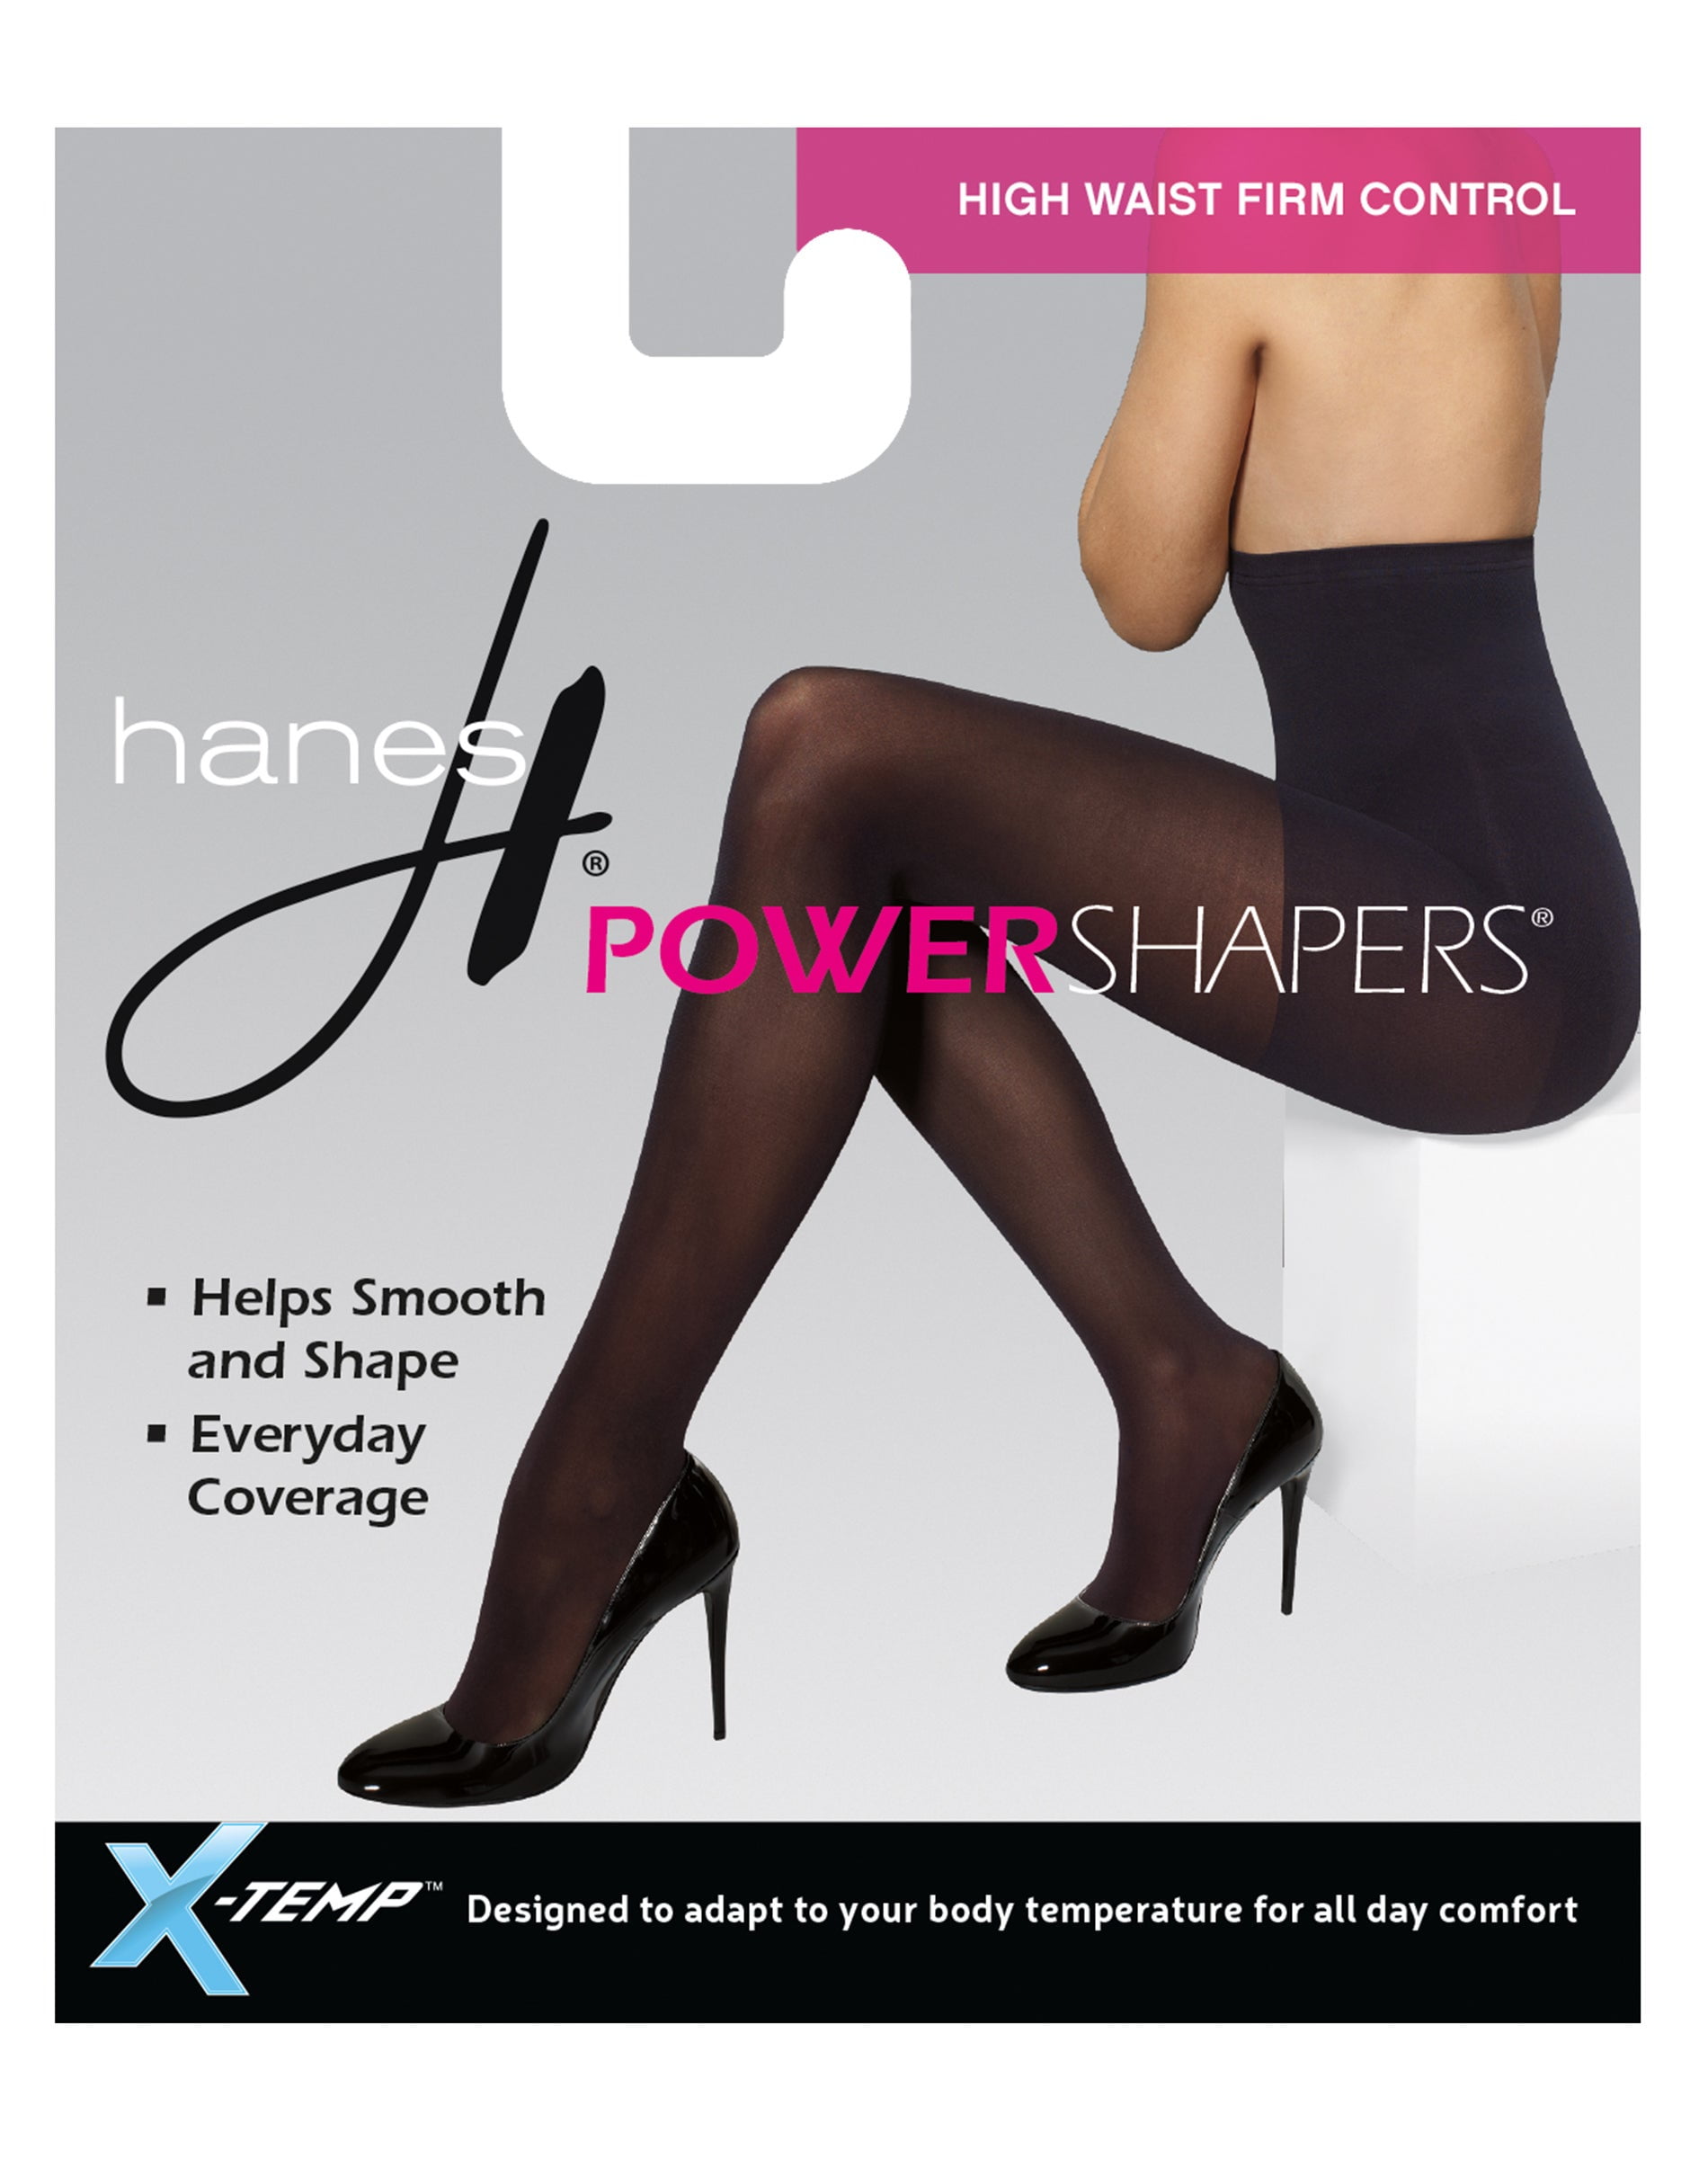 Nude Small Details about   Hanes Premium Women's Power Shapers Sheer Legs 